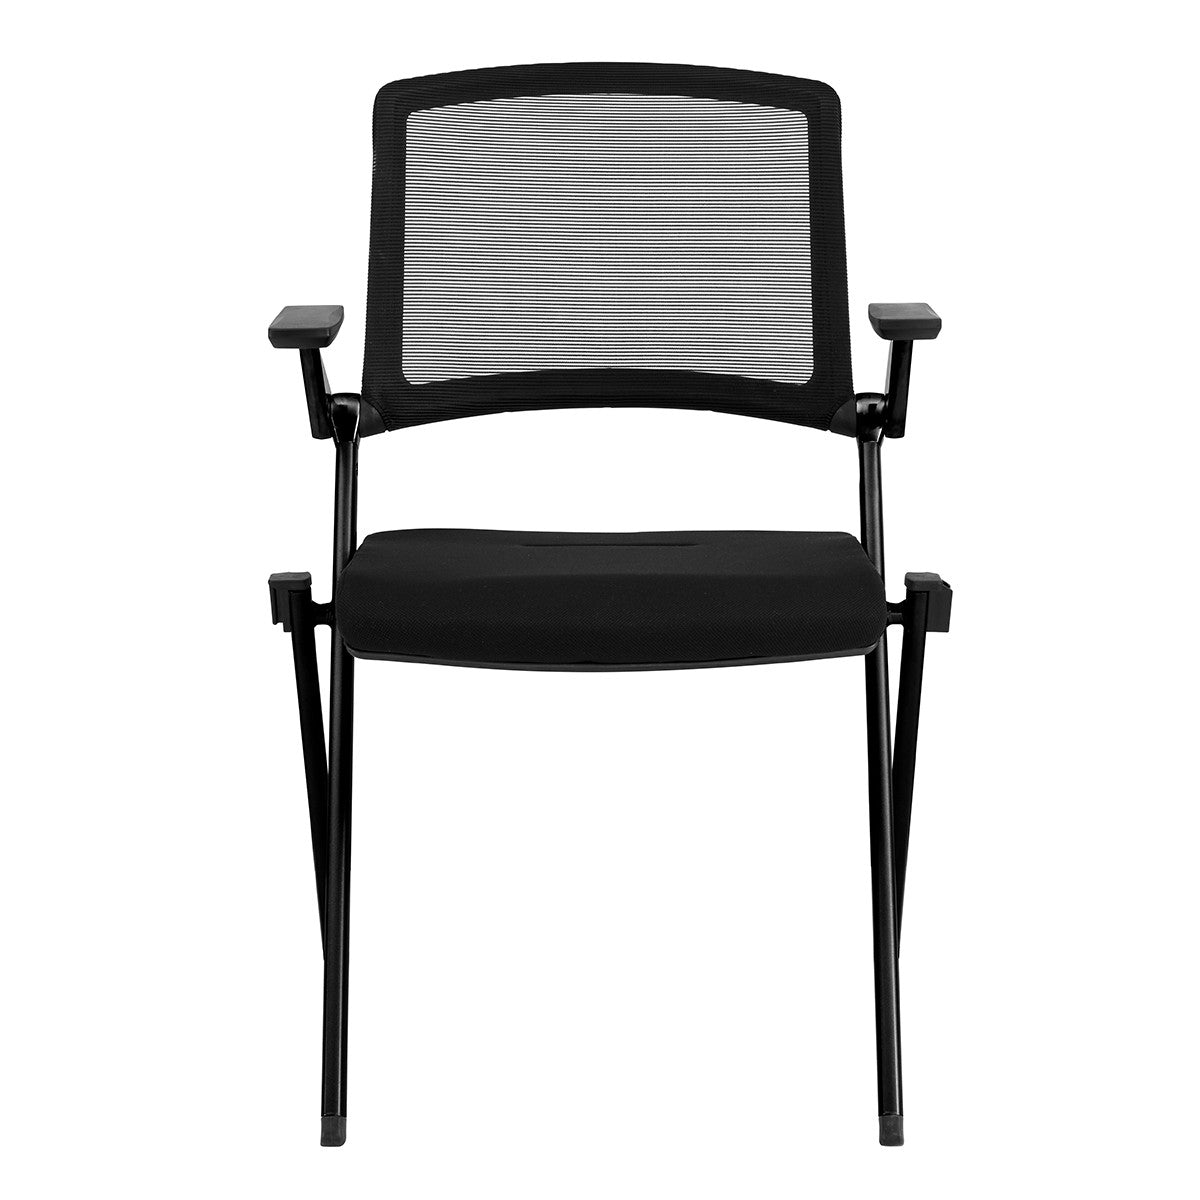 Set-Of-Two-Black-Polyester-Blend-Seat-Swivel-Task-Chair-Mesh-Back-Steel-Frame-Office-Chairs